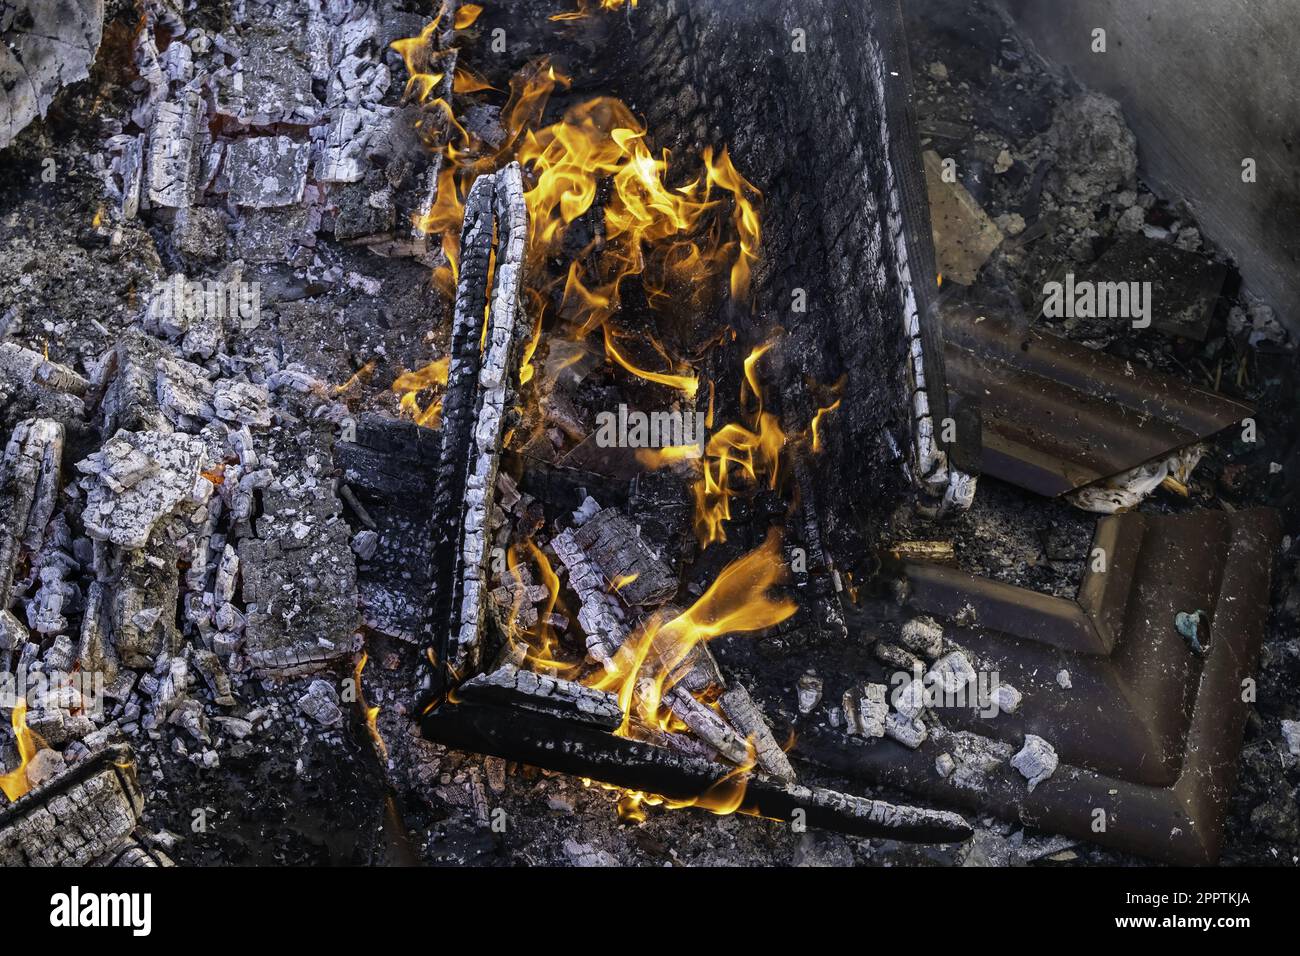 Detail of wood burning with fire and flames, destruction Stock Photo